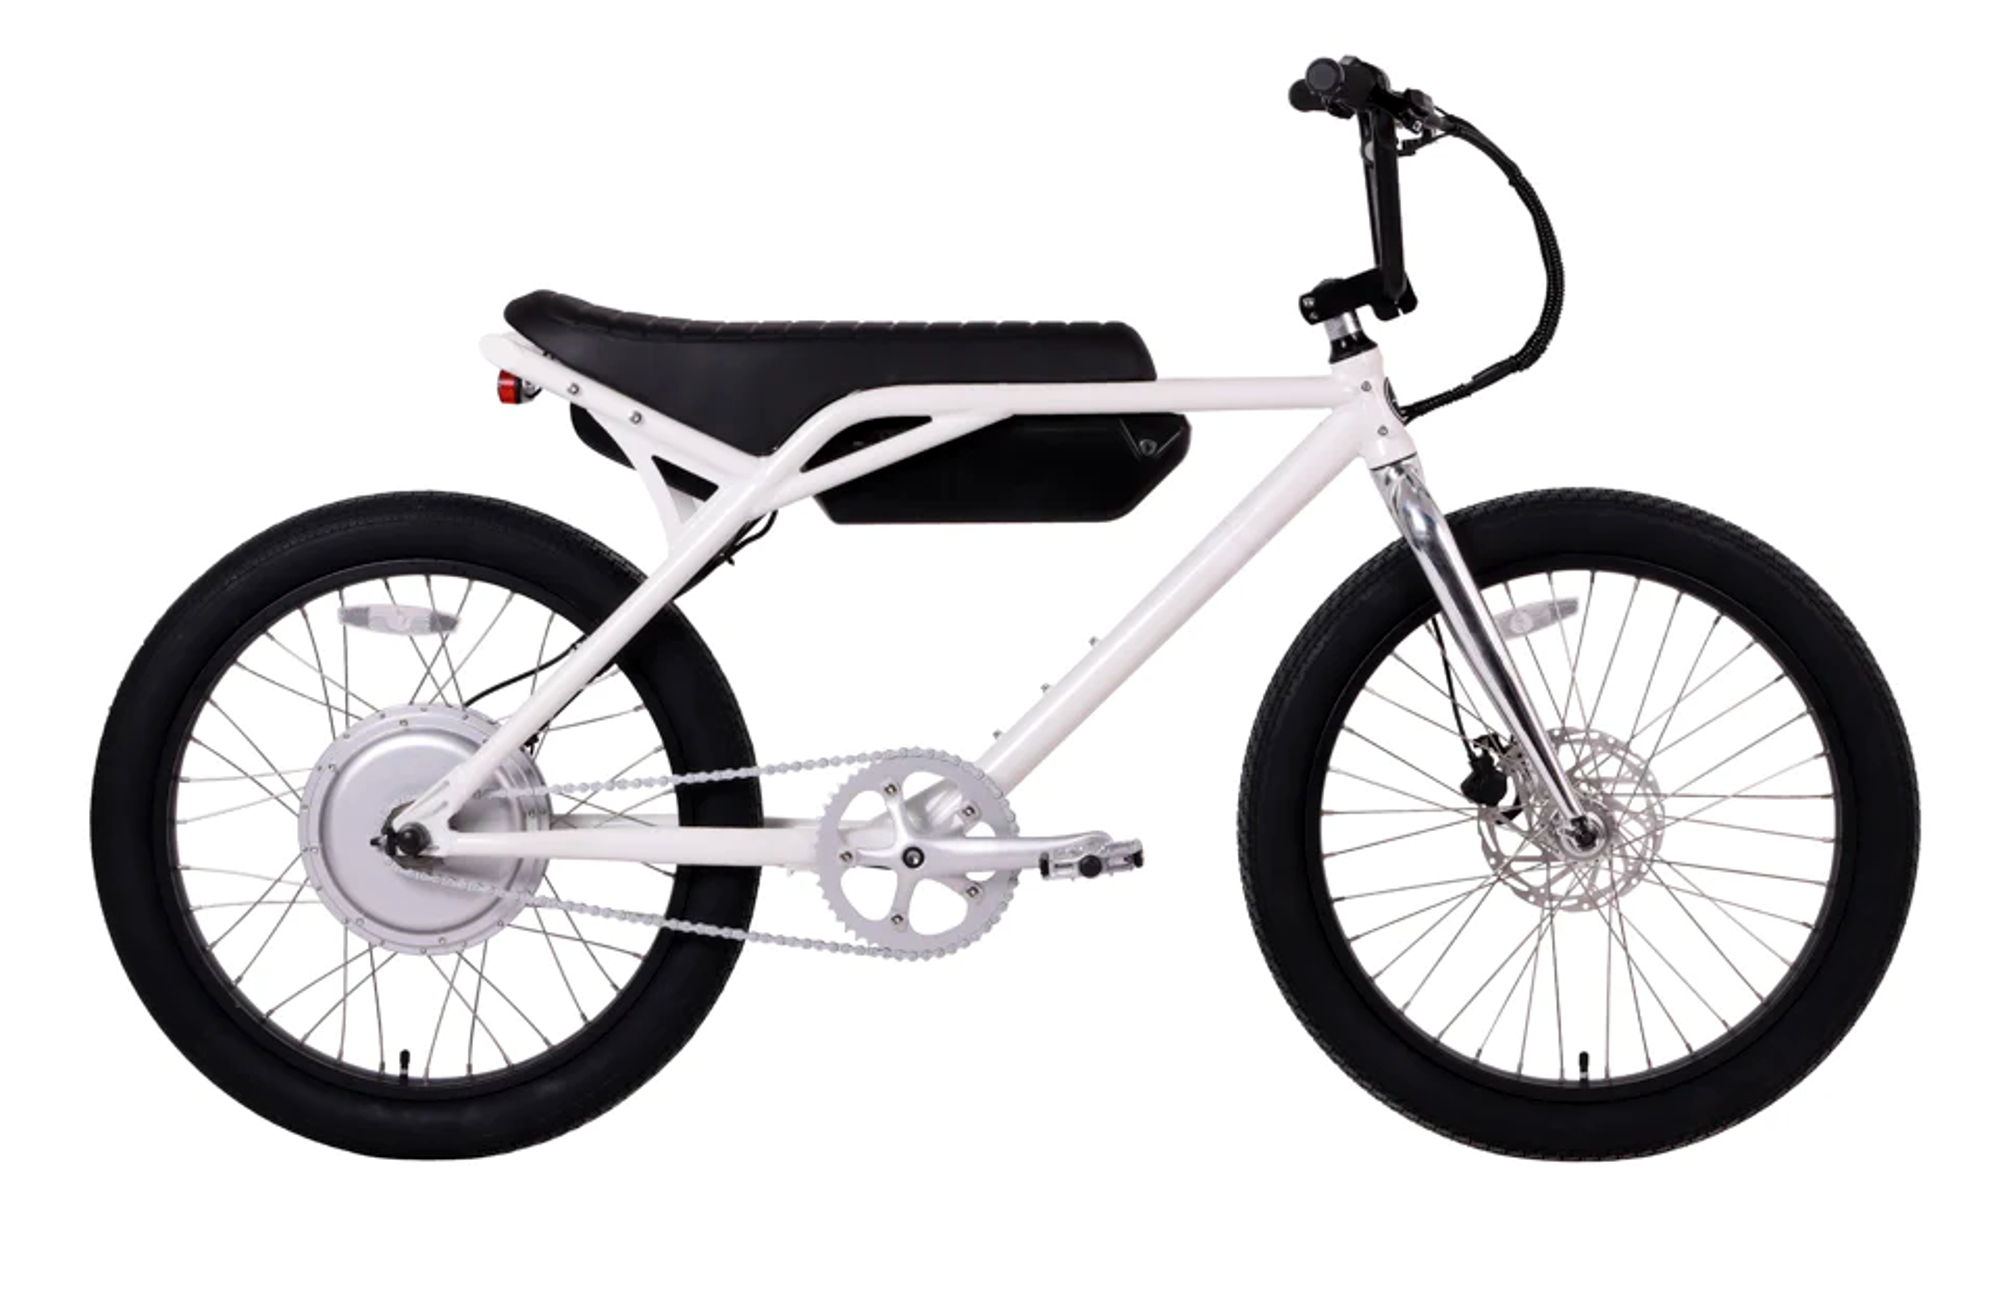 Sole e-24 electric bike in the Duke colorway against a white background.